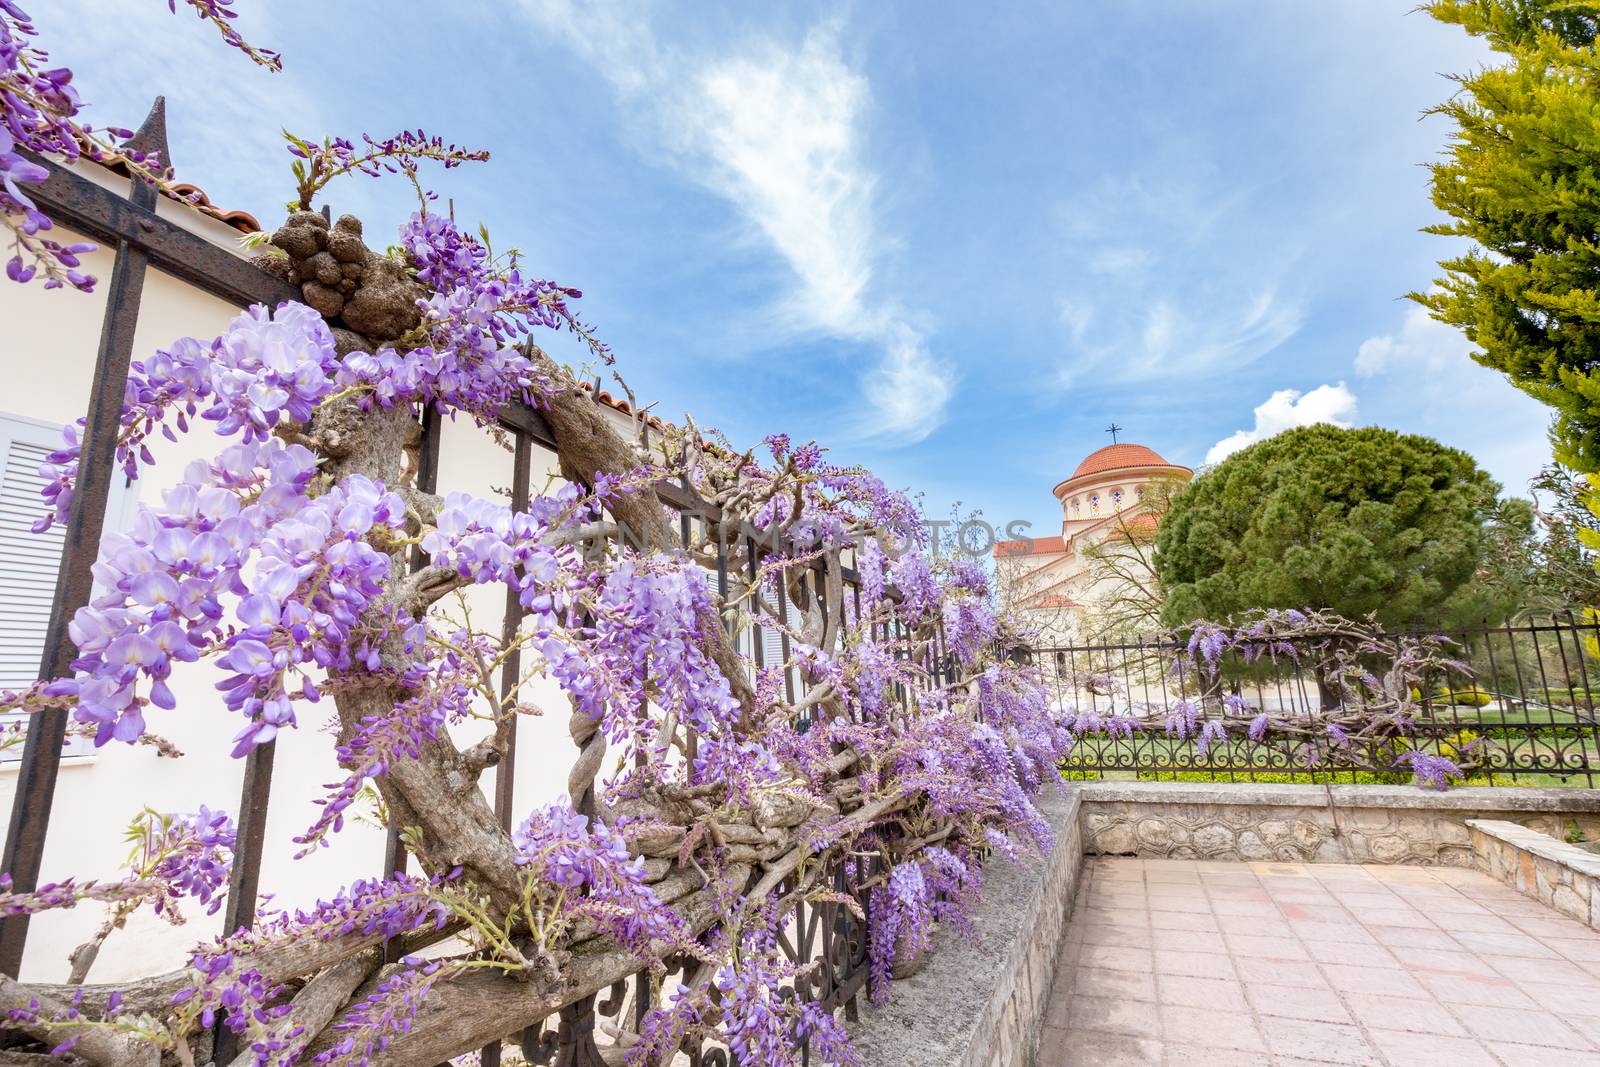 Blooming blue Wisteria sinensis on fence in Kefalonia Greece